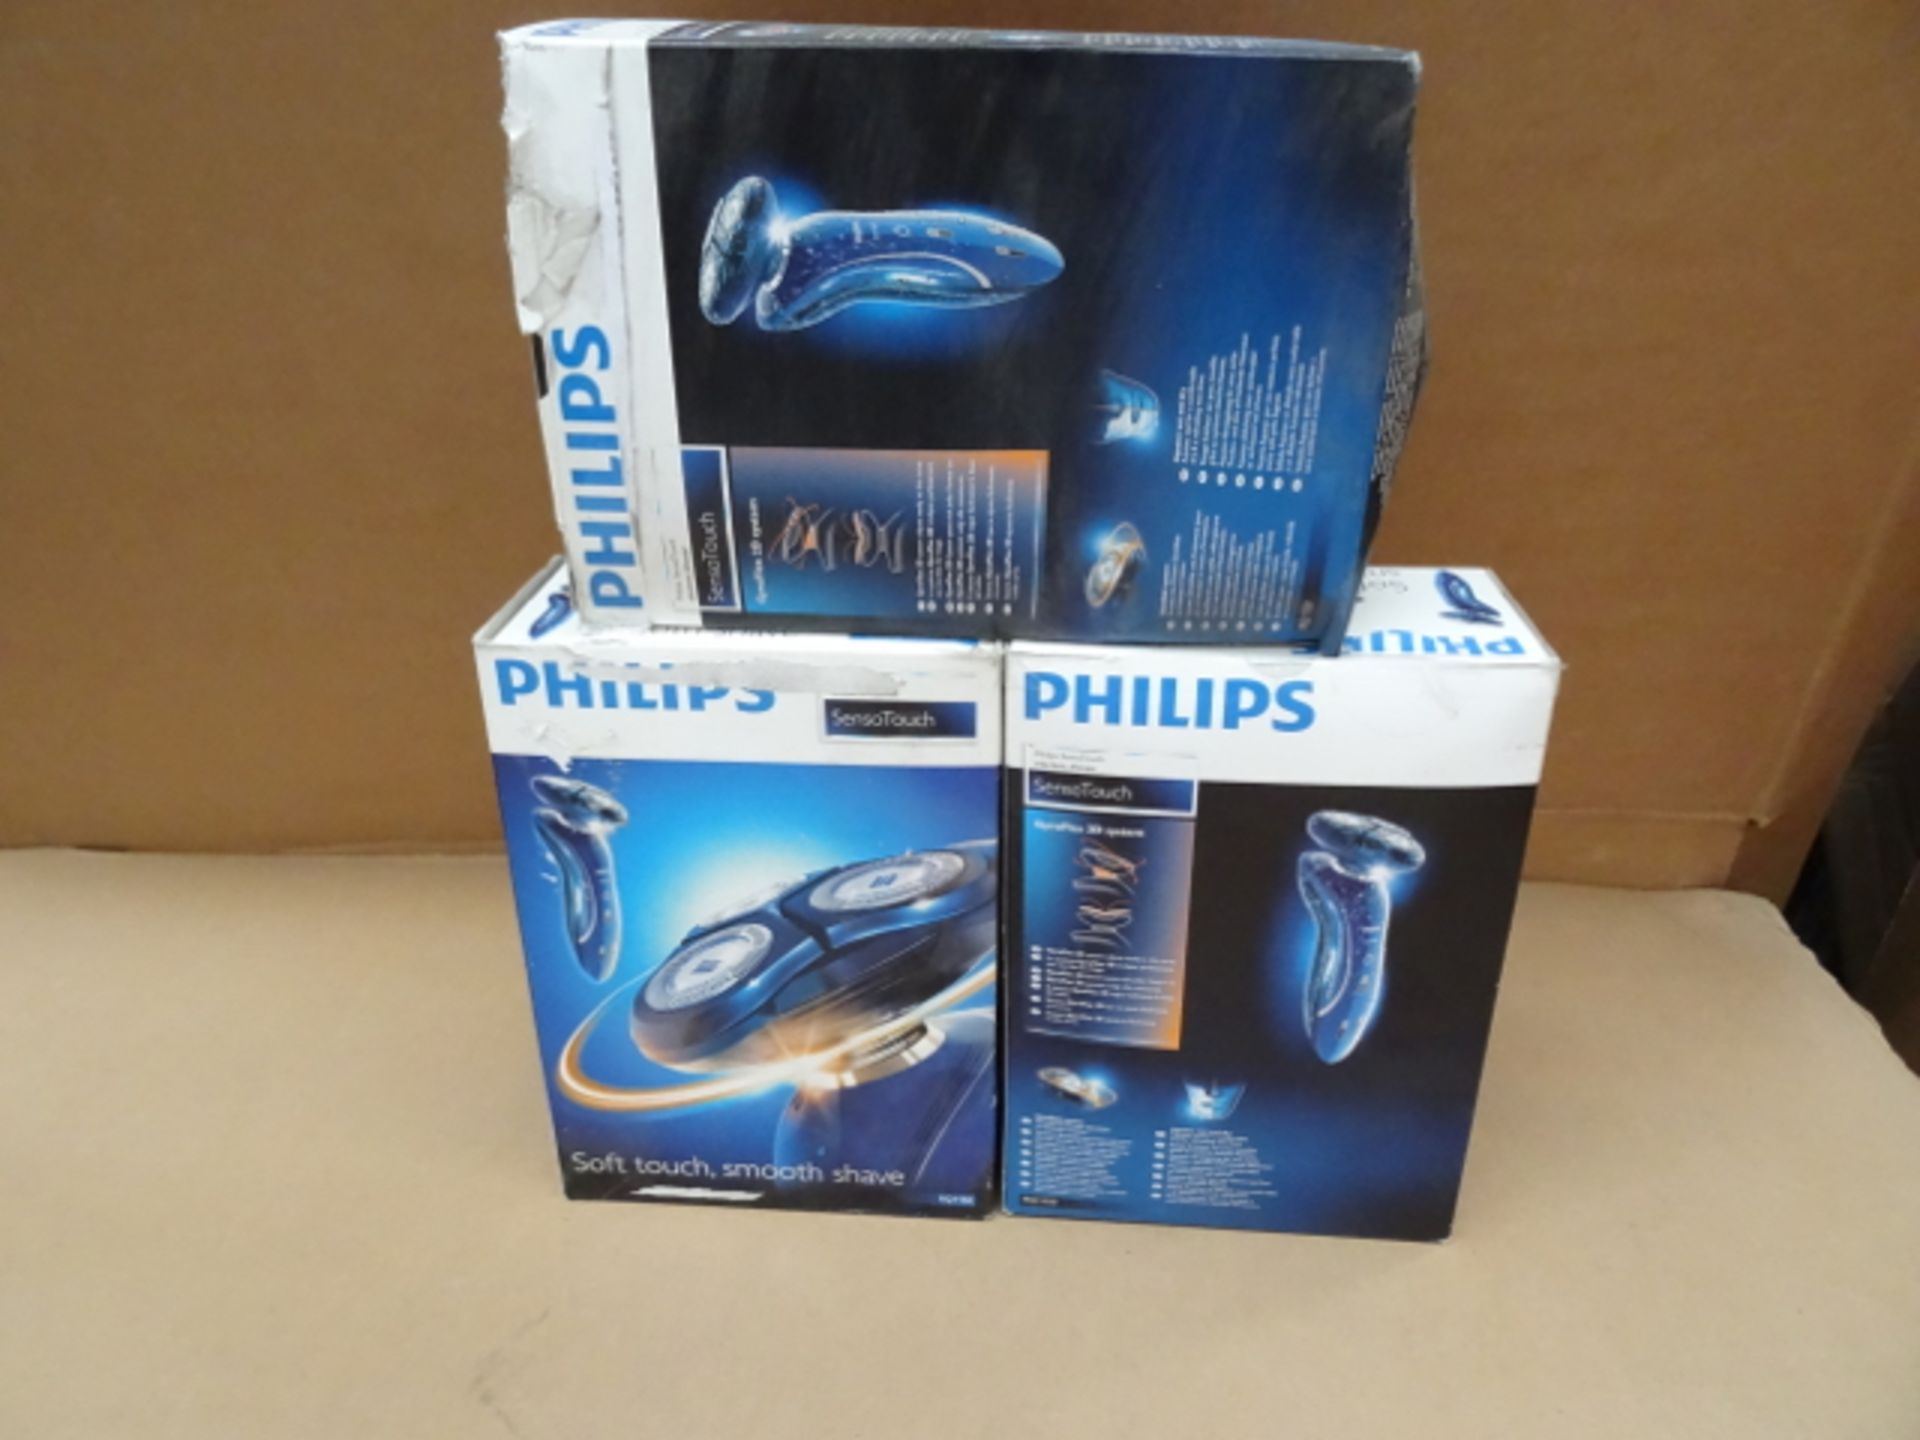 3 x Philips SensoTouch RQ1150 Electric Shaver. •GyroFlex 2D system adjusts easily to the curve
•